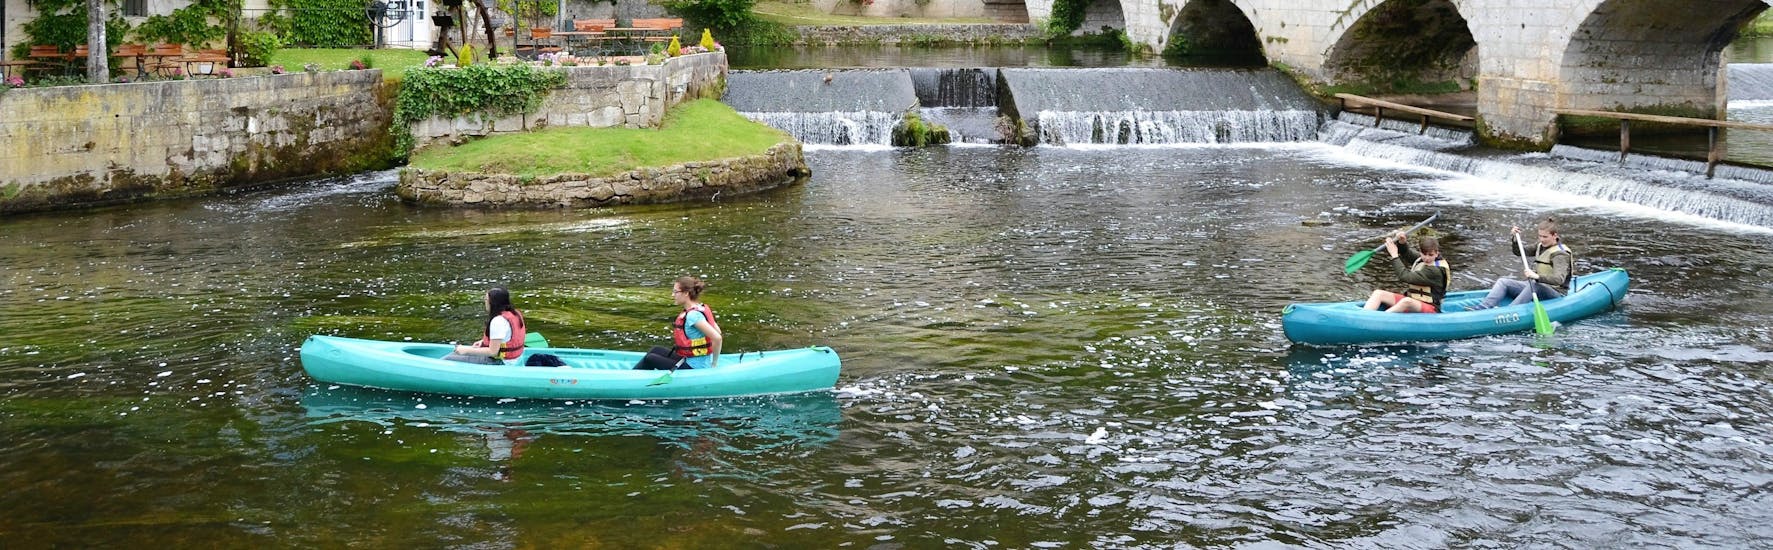 Friends are paddling on the Dronne river in the middle of the charming village of Brantome during their Full Day on the Dronne - 12km canoeing tour with Allo Canoës Dordogne.